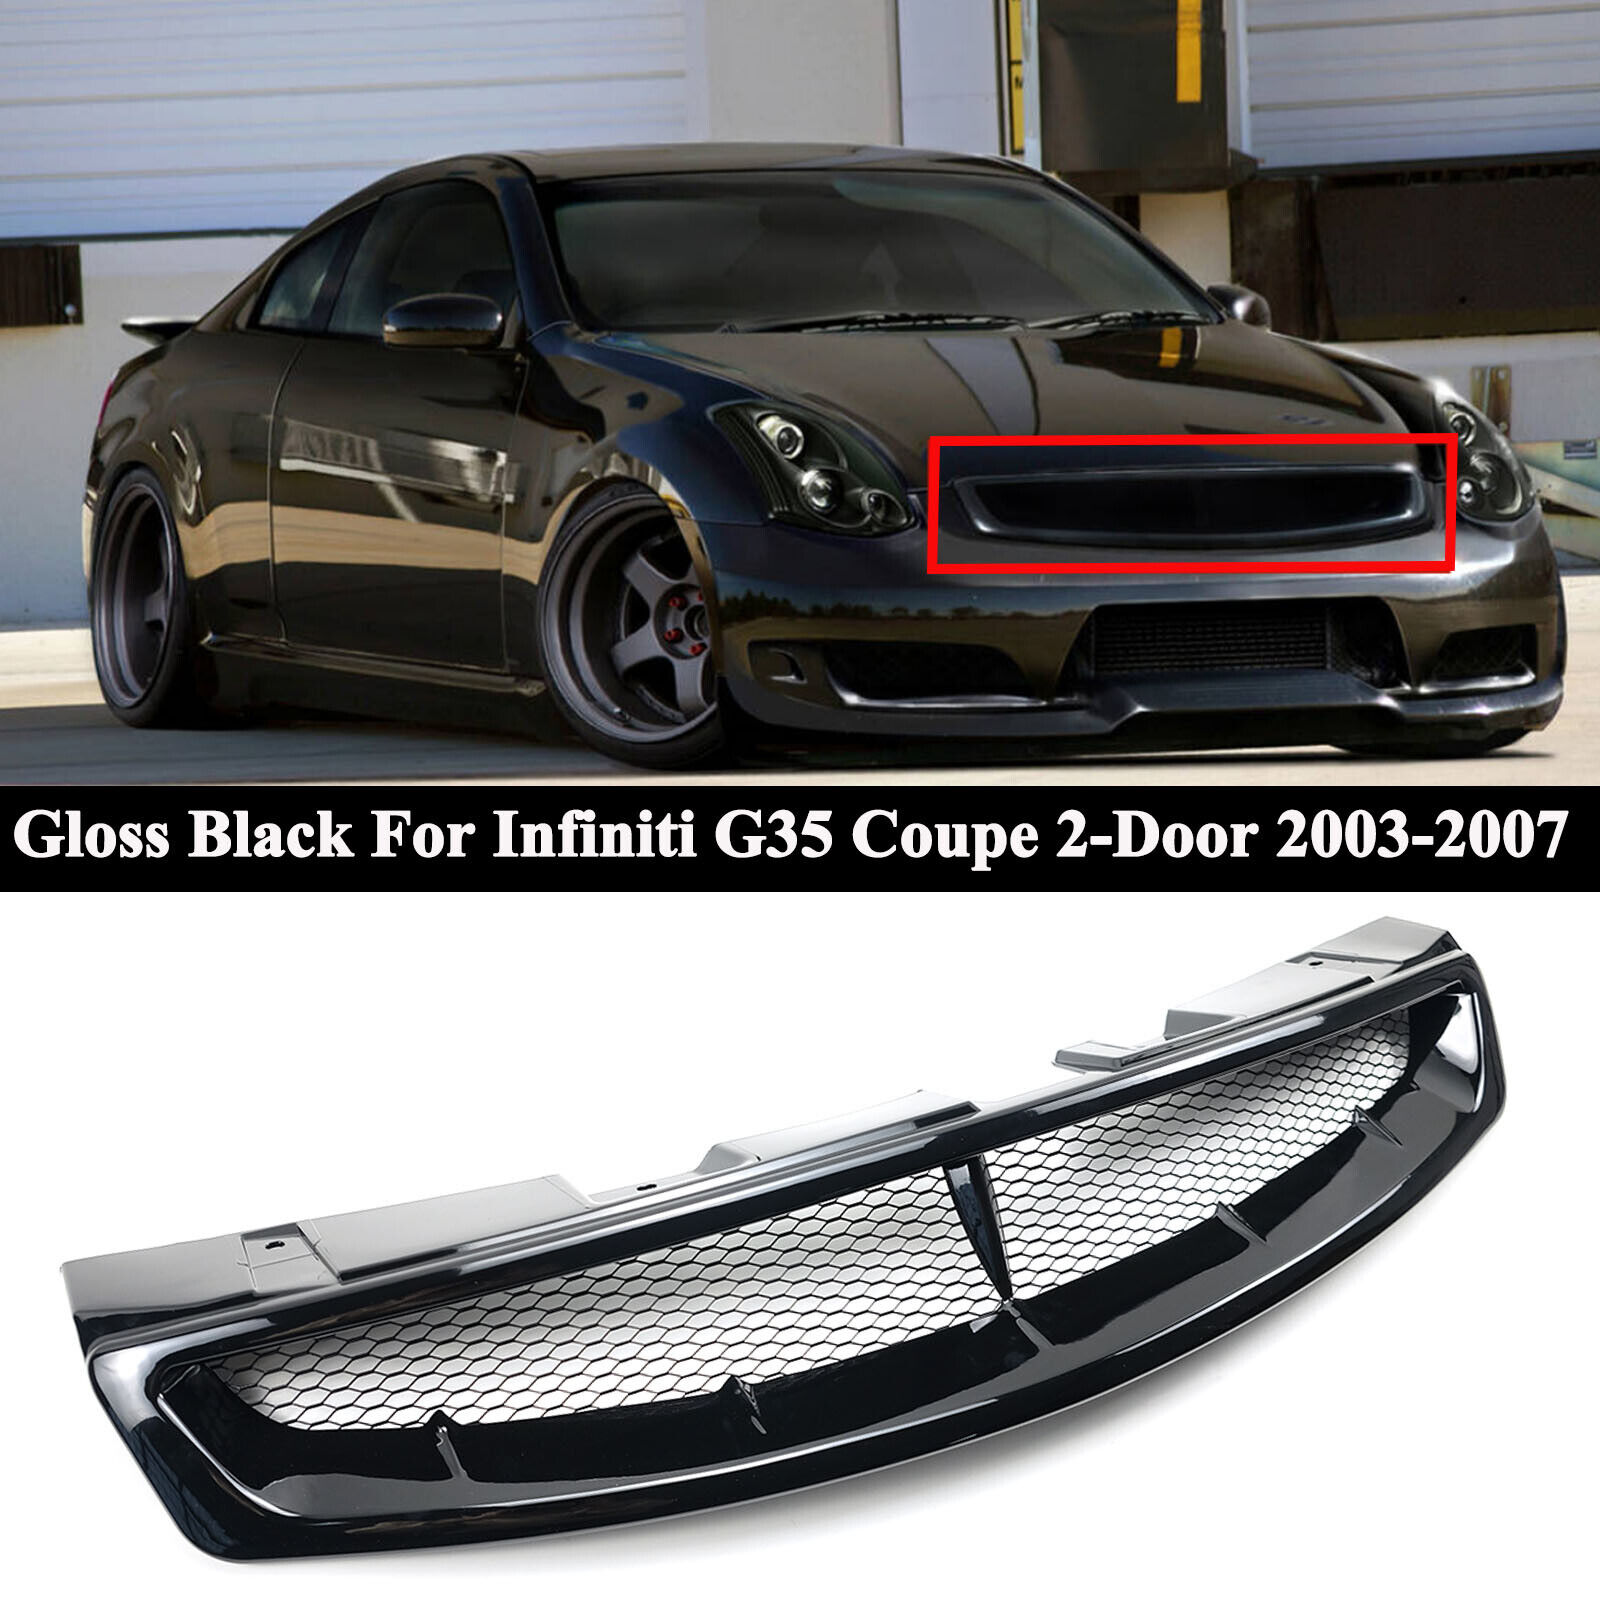 For Infiniti G35 Coupe 2-Door 03-2007 Glossy Black Front Bumper Hood Mesh Grille